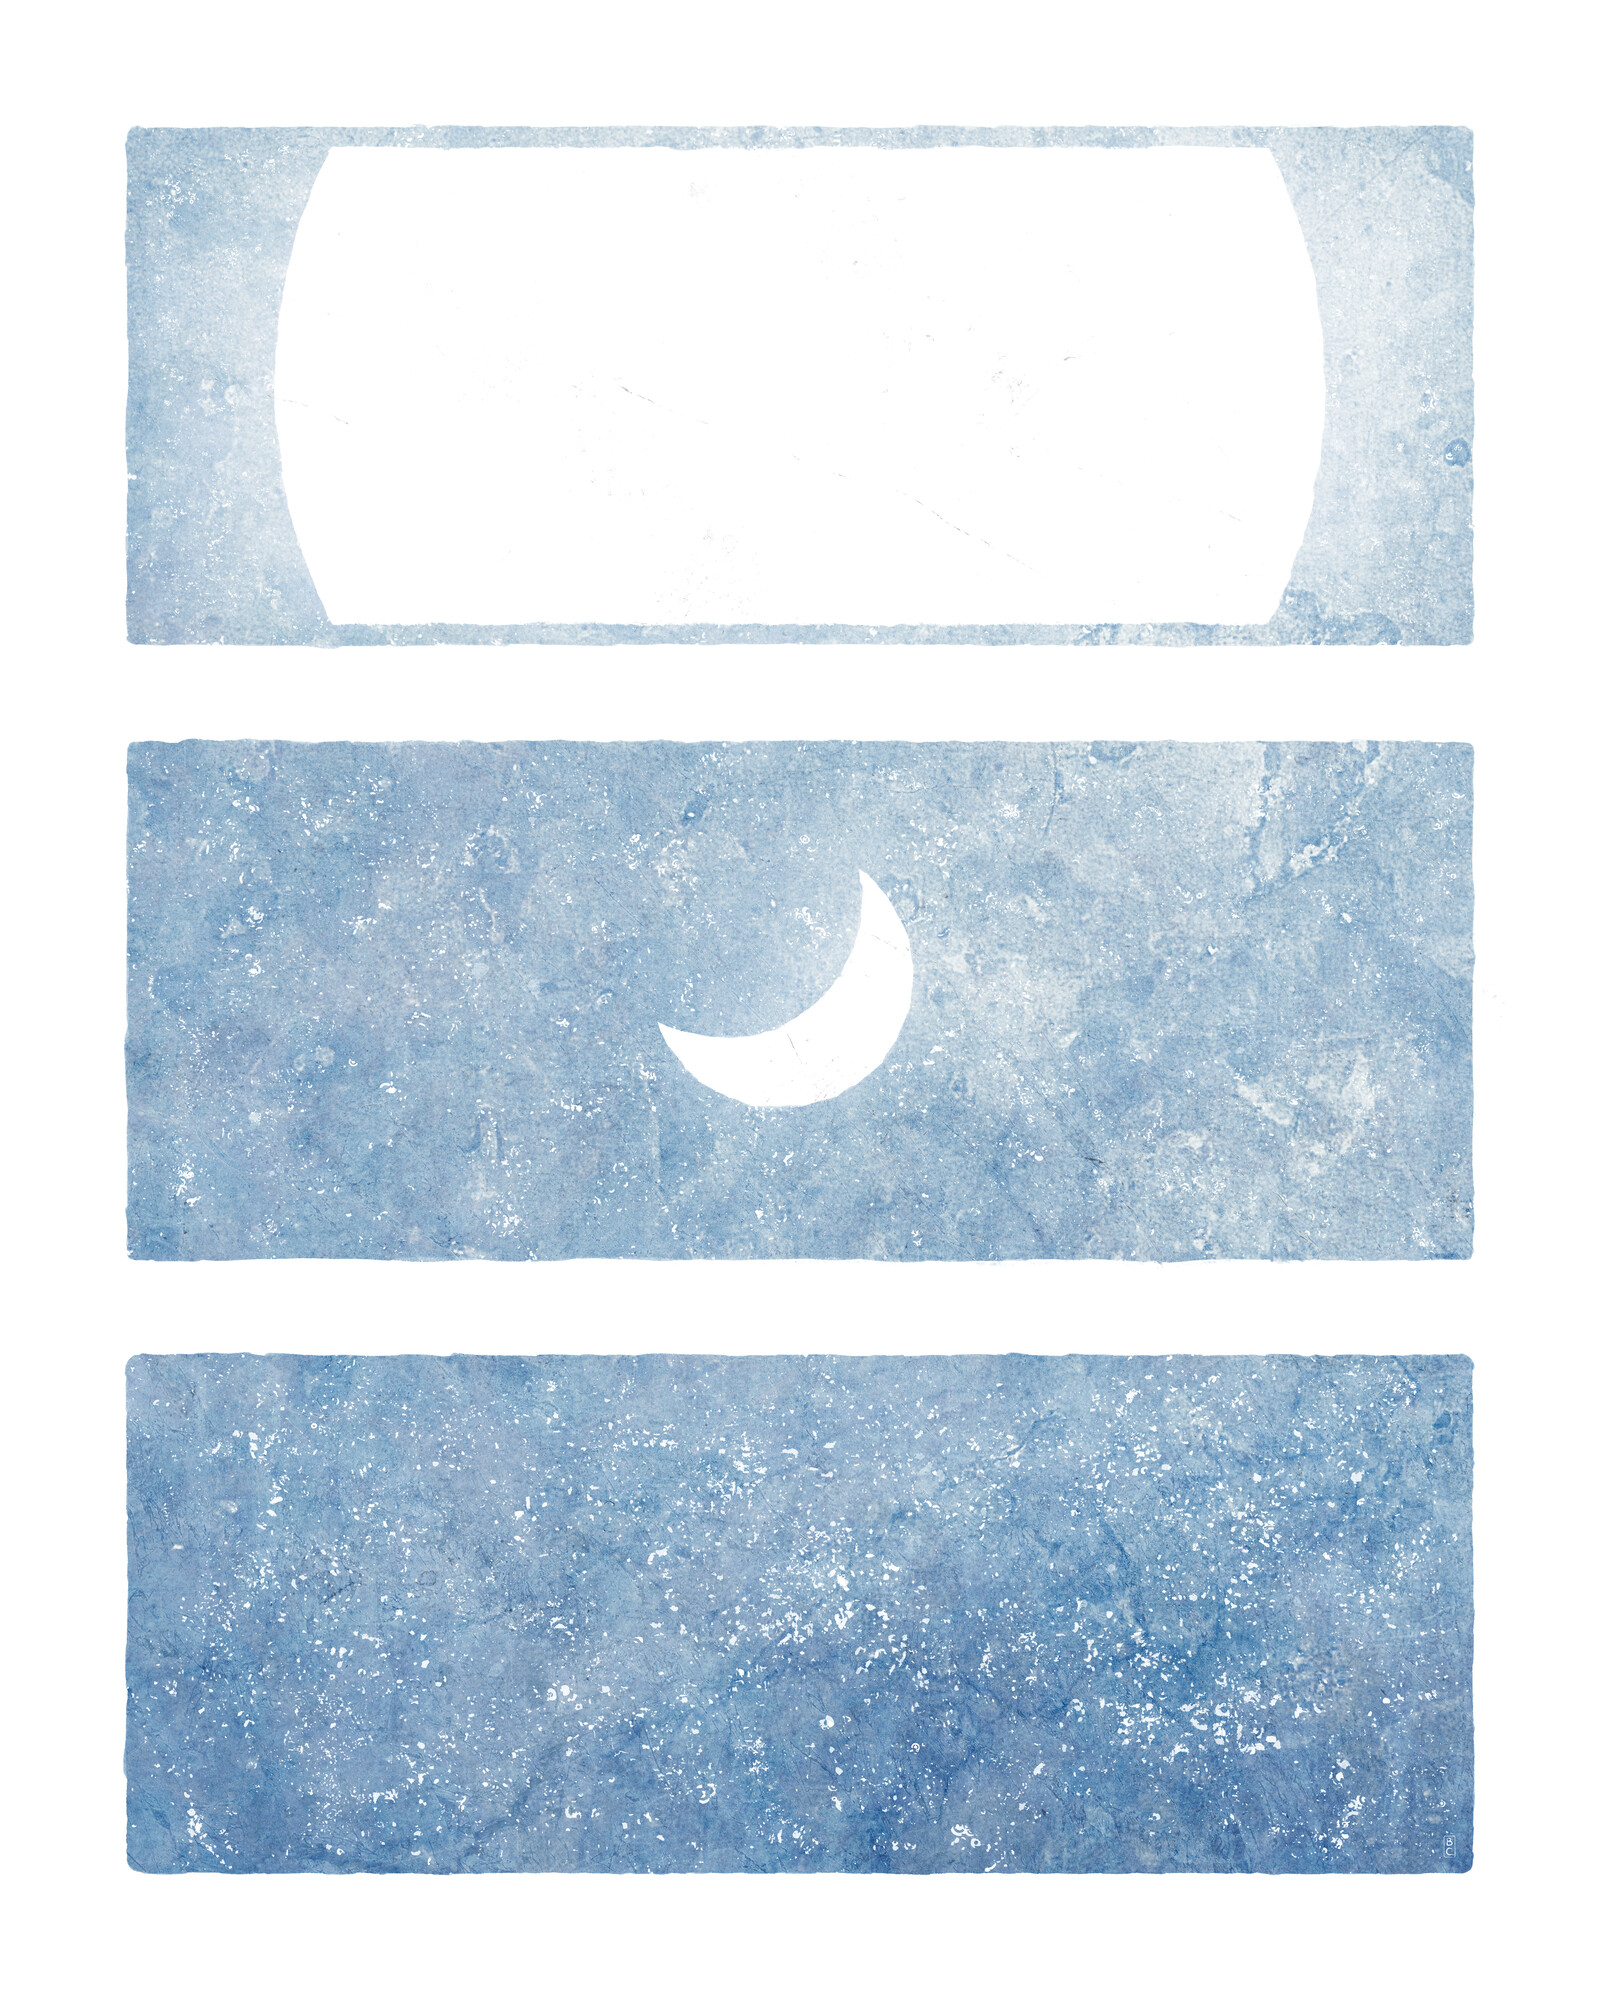 Three blue panels in a vertical layout. The top panel has a glowing white circle at center, large enough that you can’t see the whole thing. The middle panel has a small glowing white moon shape at center. The bottom panel has lots of little white dots.